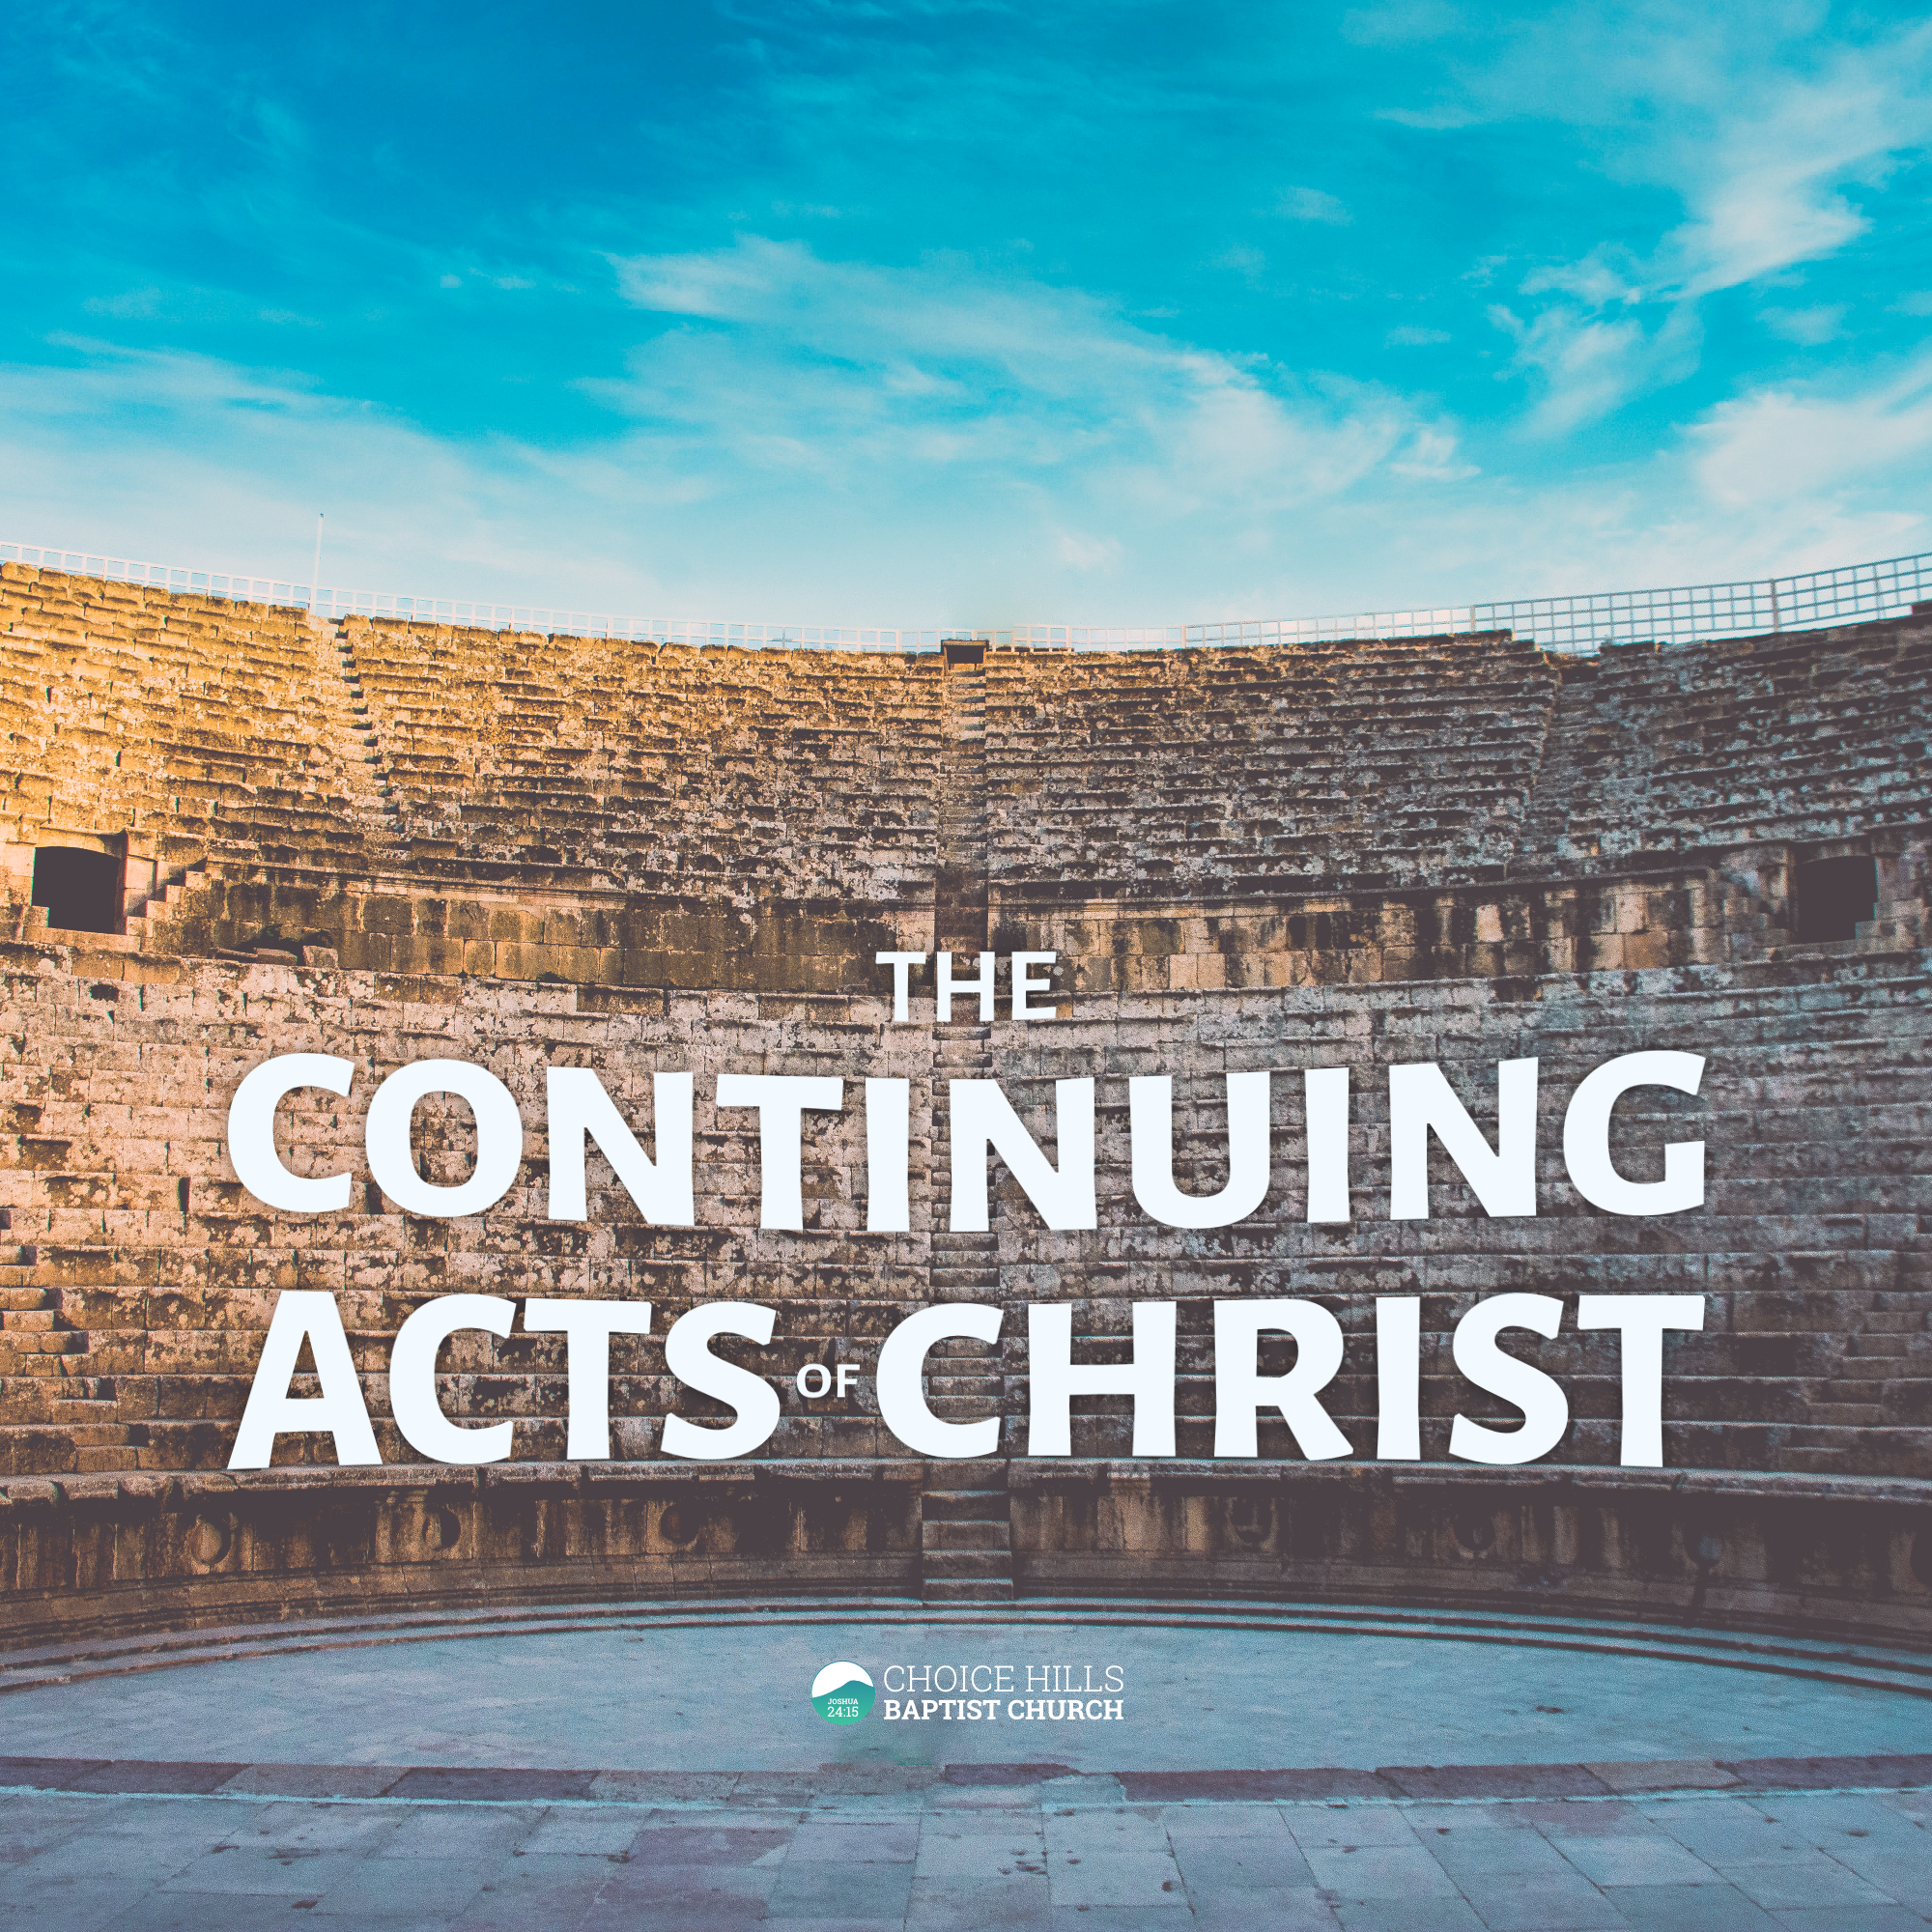 Ceased Not: The Continuing Acts of Christ—A Study of the Book of Acts